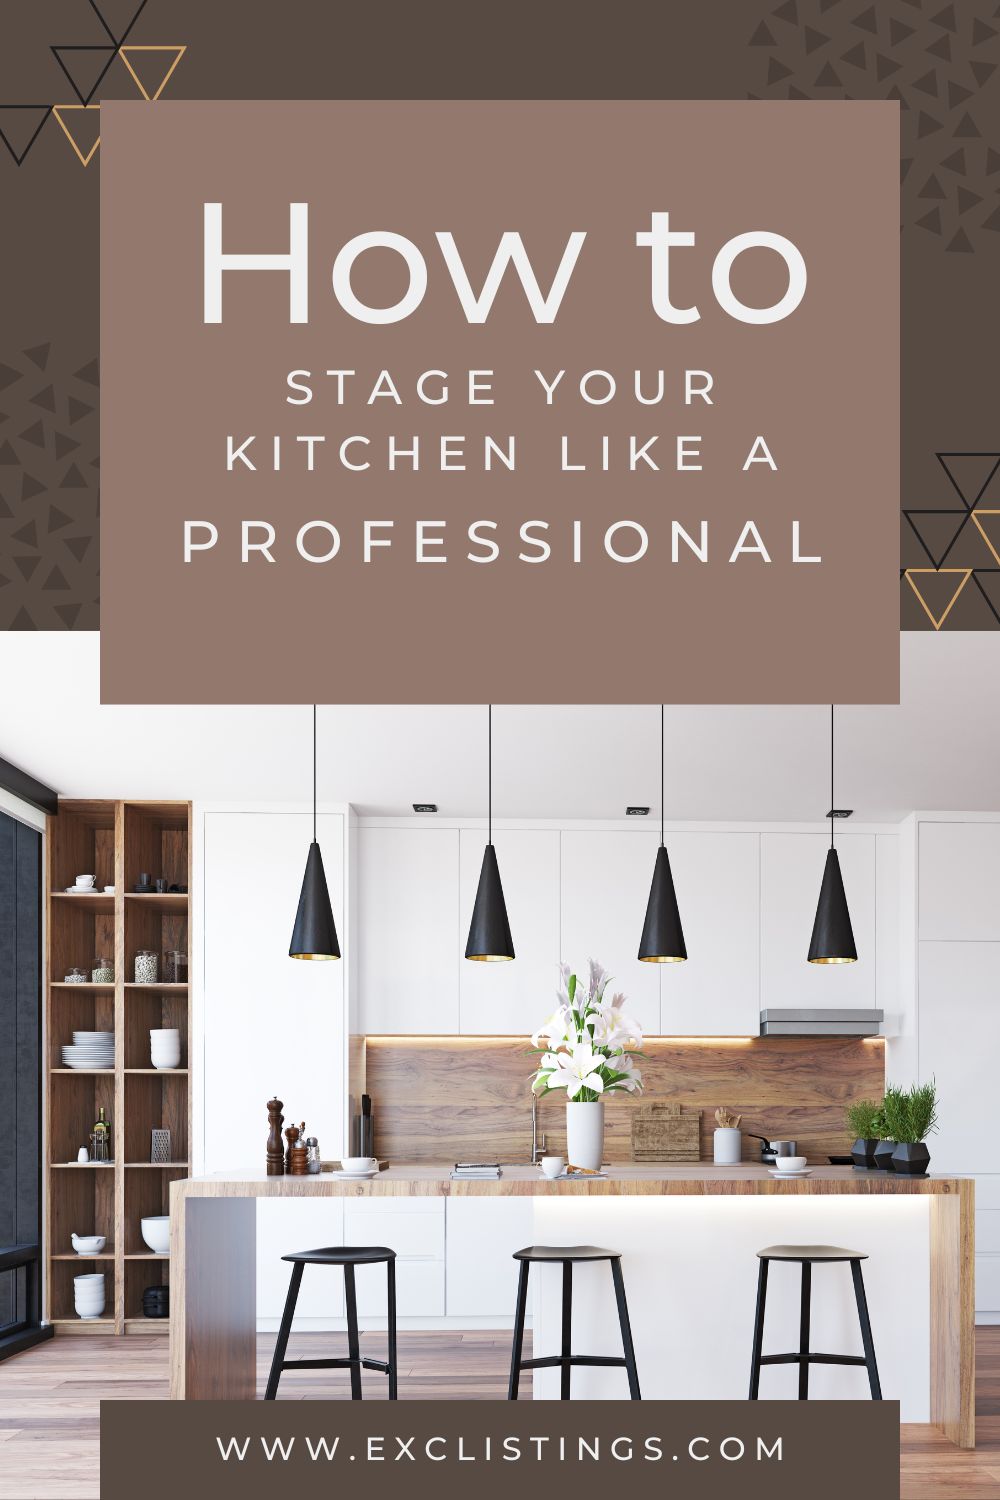 Stage your kitchen